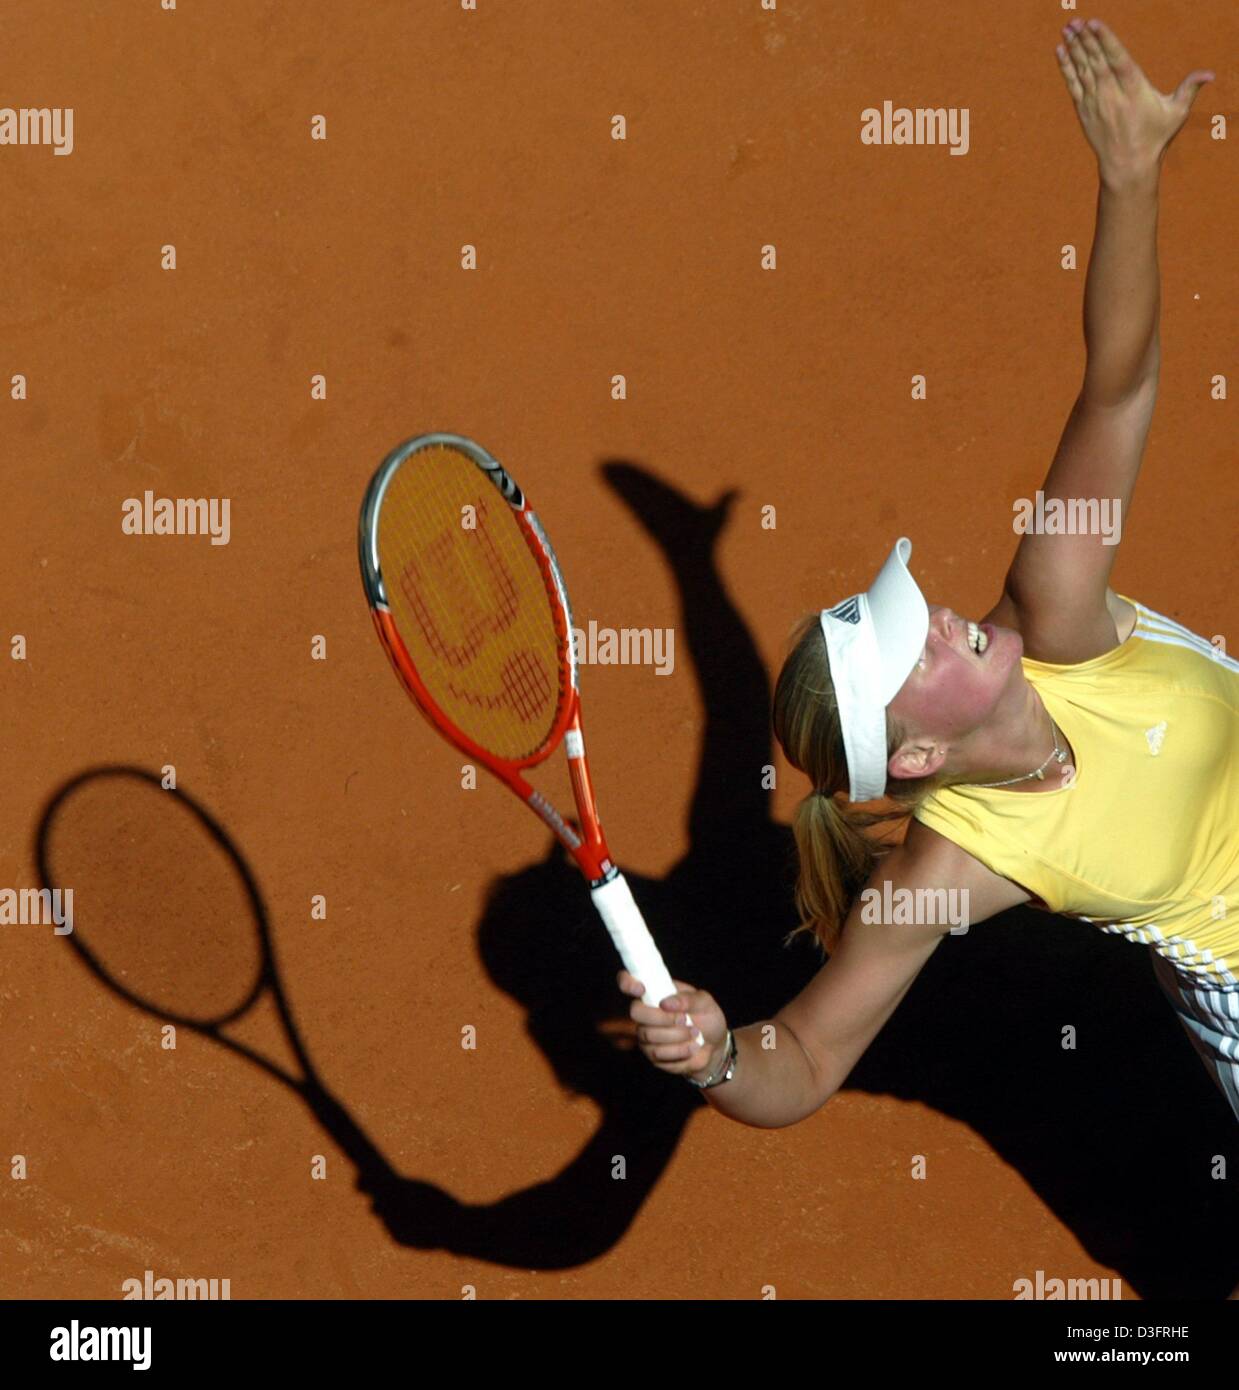 (dpa) - German tennis player Anna-Lena Groenefeld is preparing to return the ball, Berlin, 5 May 2003. Groenefeld lost her first round match in the 96th International German Open against Daja Bedanova in 2 sets, 2-6, 3-6. Stock Photo